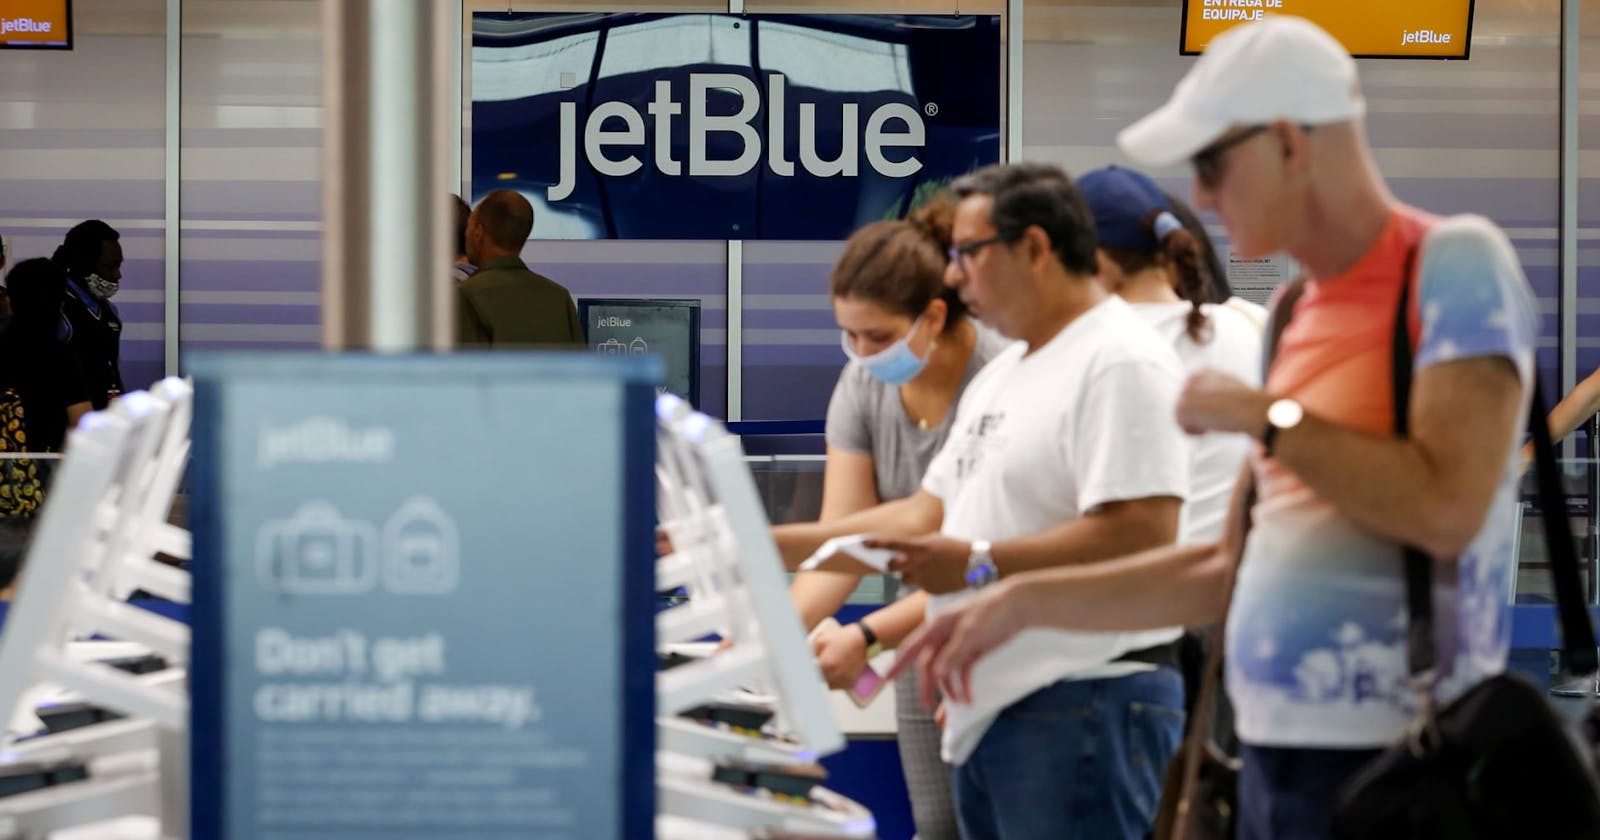 Jetblue 𝟏𝟖𝟎𝟒-𝟕𝟏𝟗-𝟔𝟑𝟎𝟎 Customer Service Phone Number | For Group Booking |